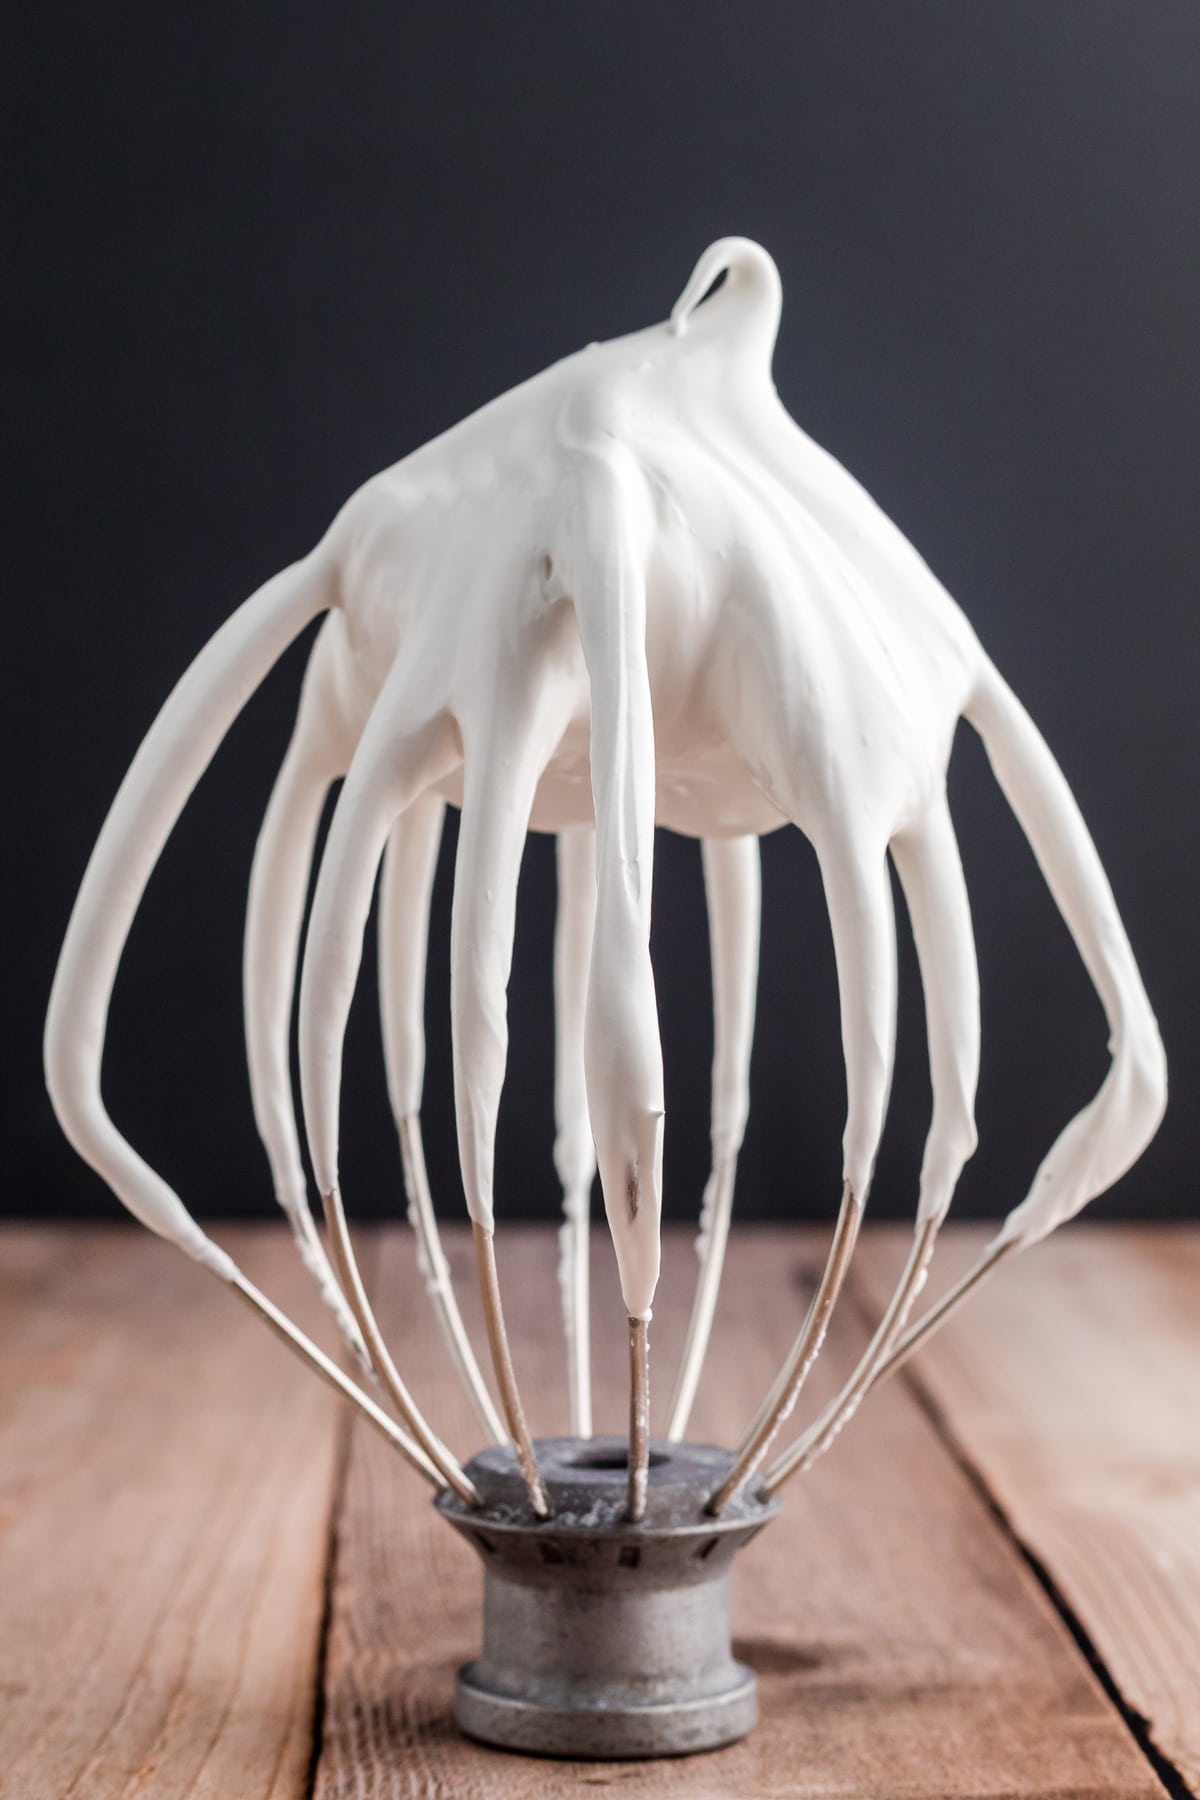 Royal Icing on a whisk.